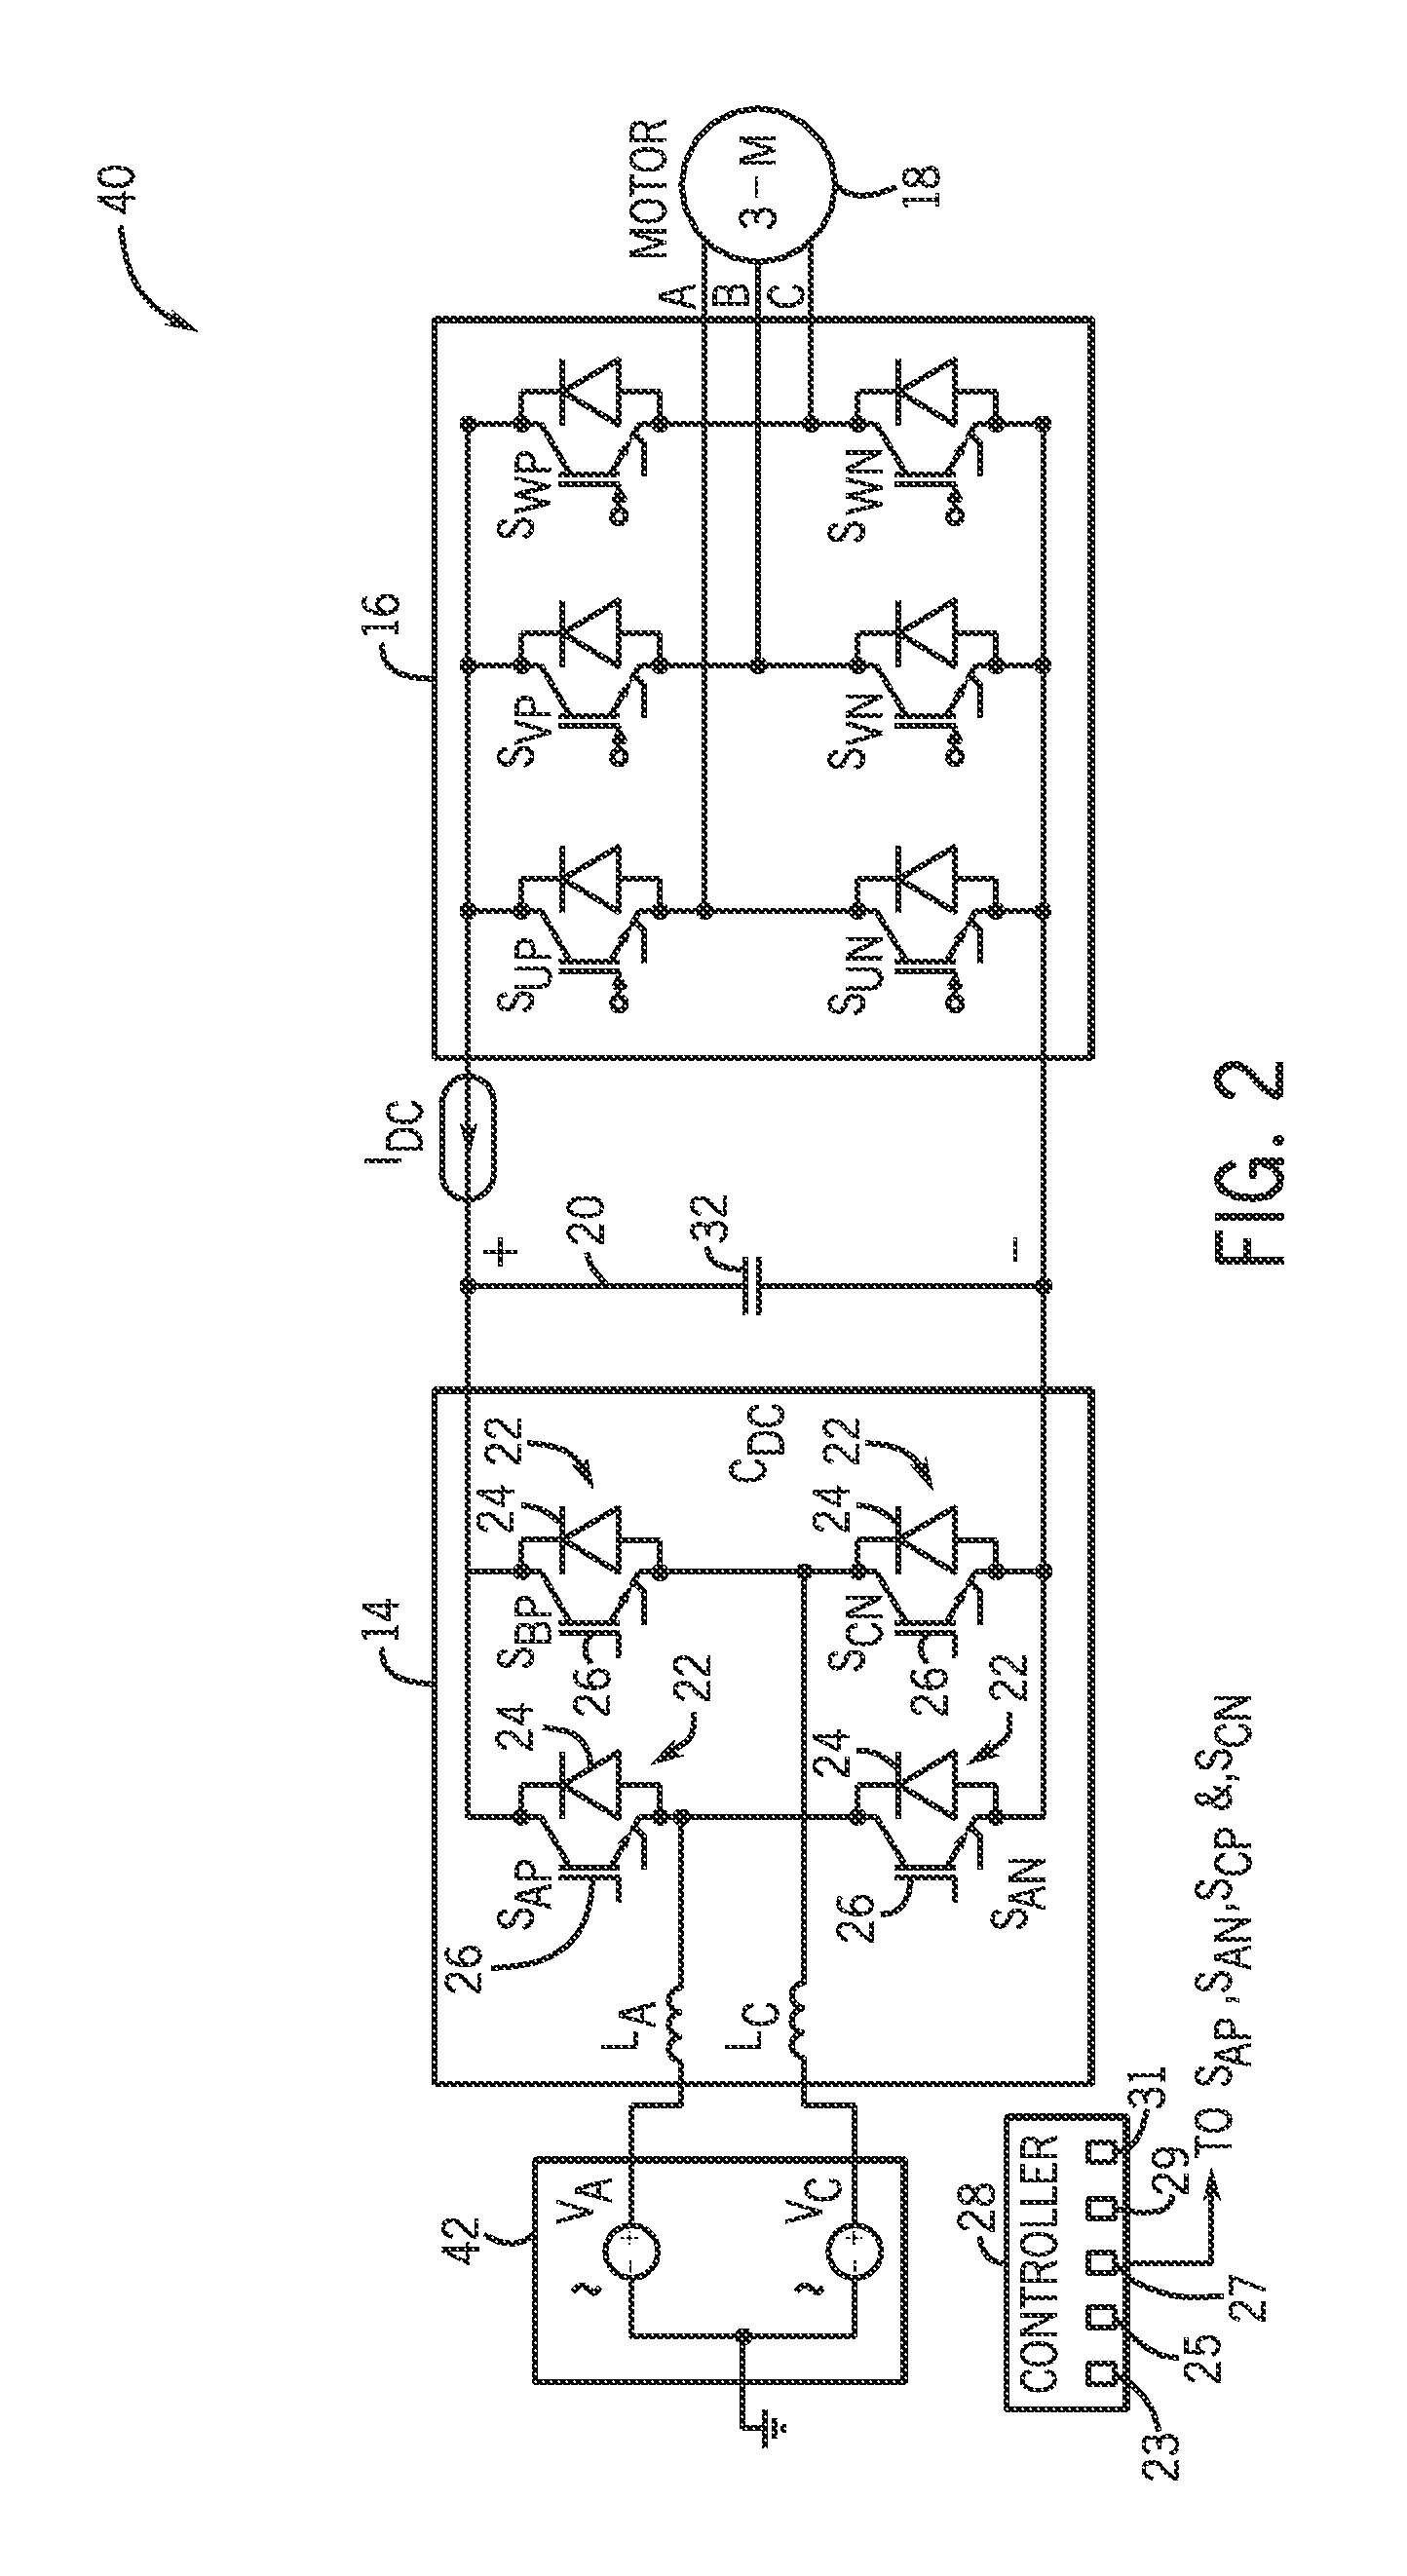 Single phase operation of a three-phase drive system